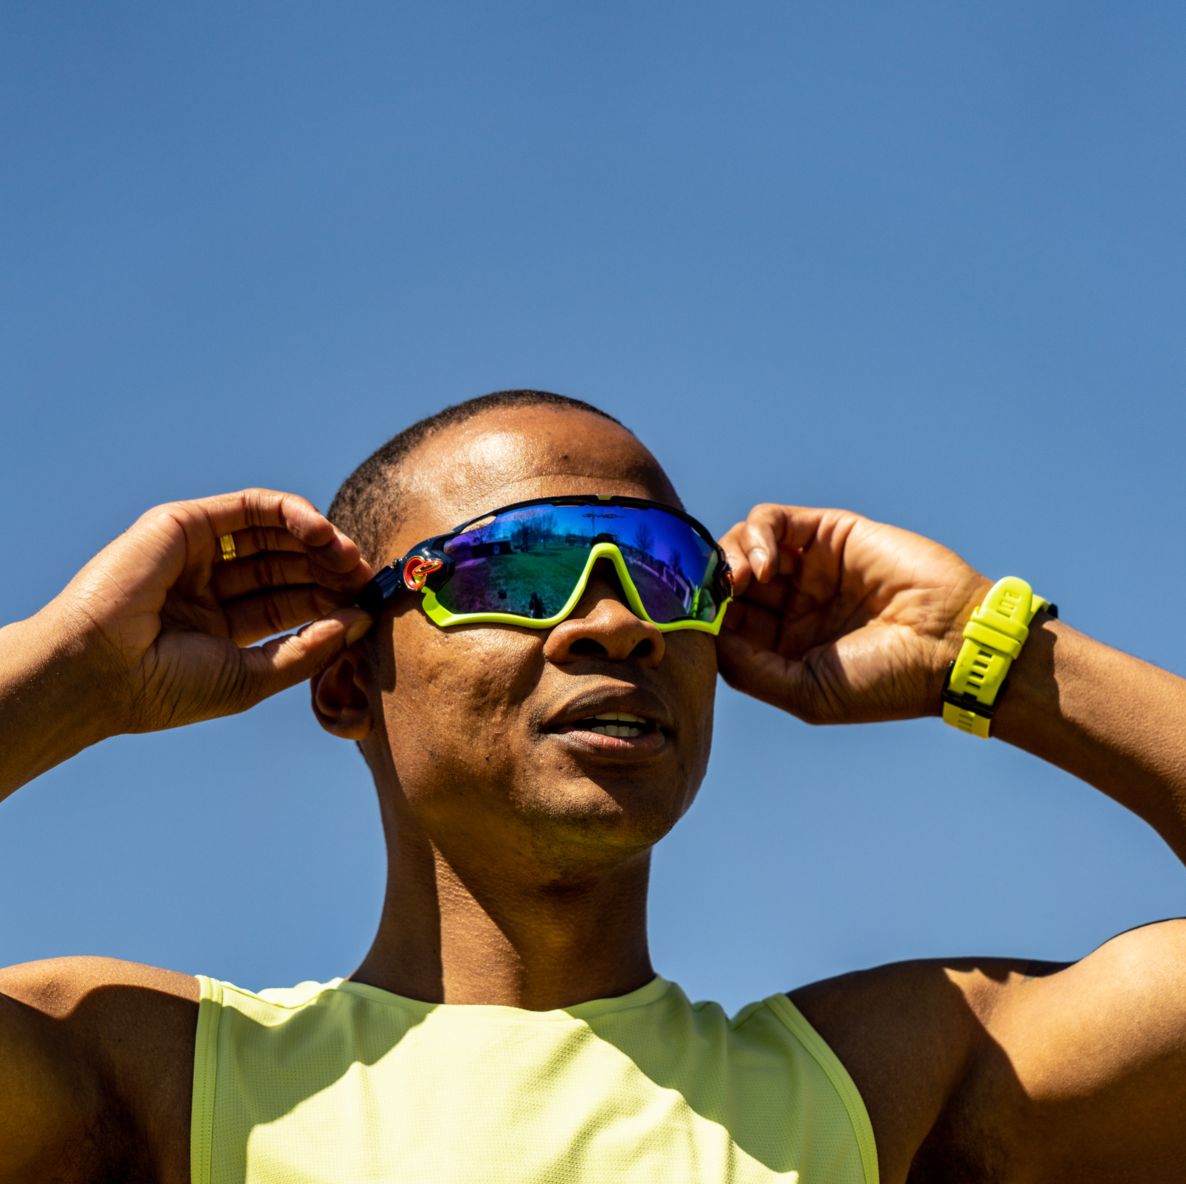 Running With Sunglasses: Why UV Eye Protection Is So Important